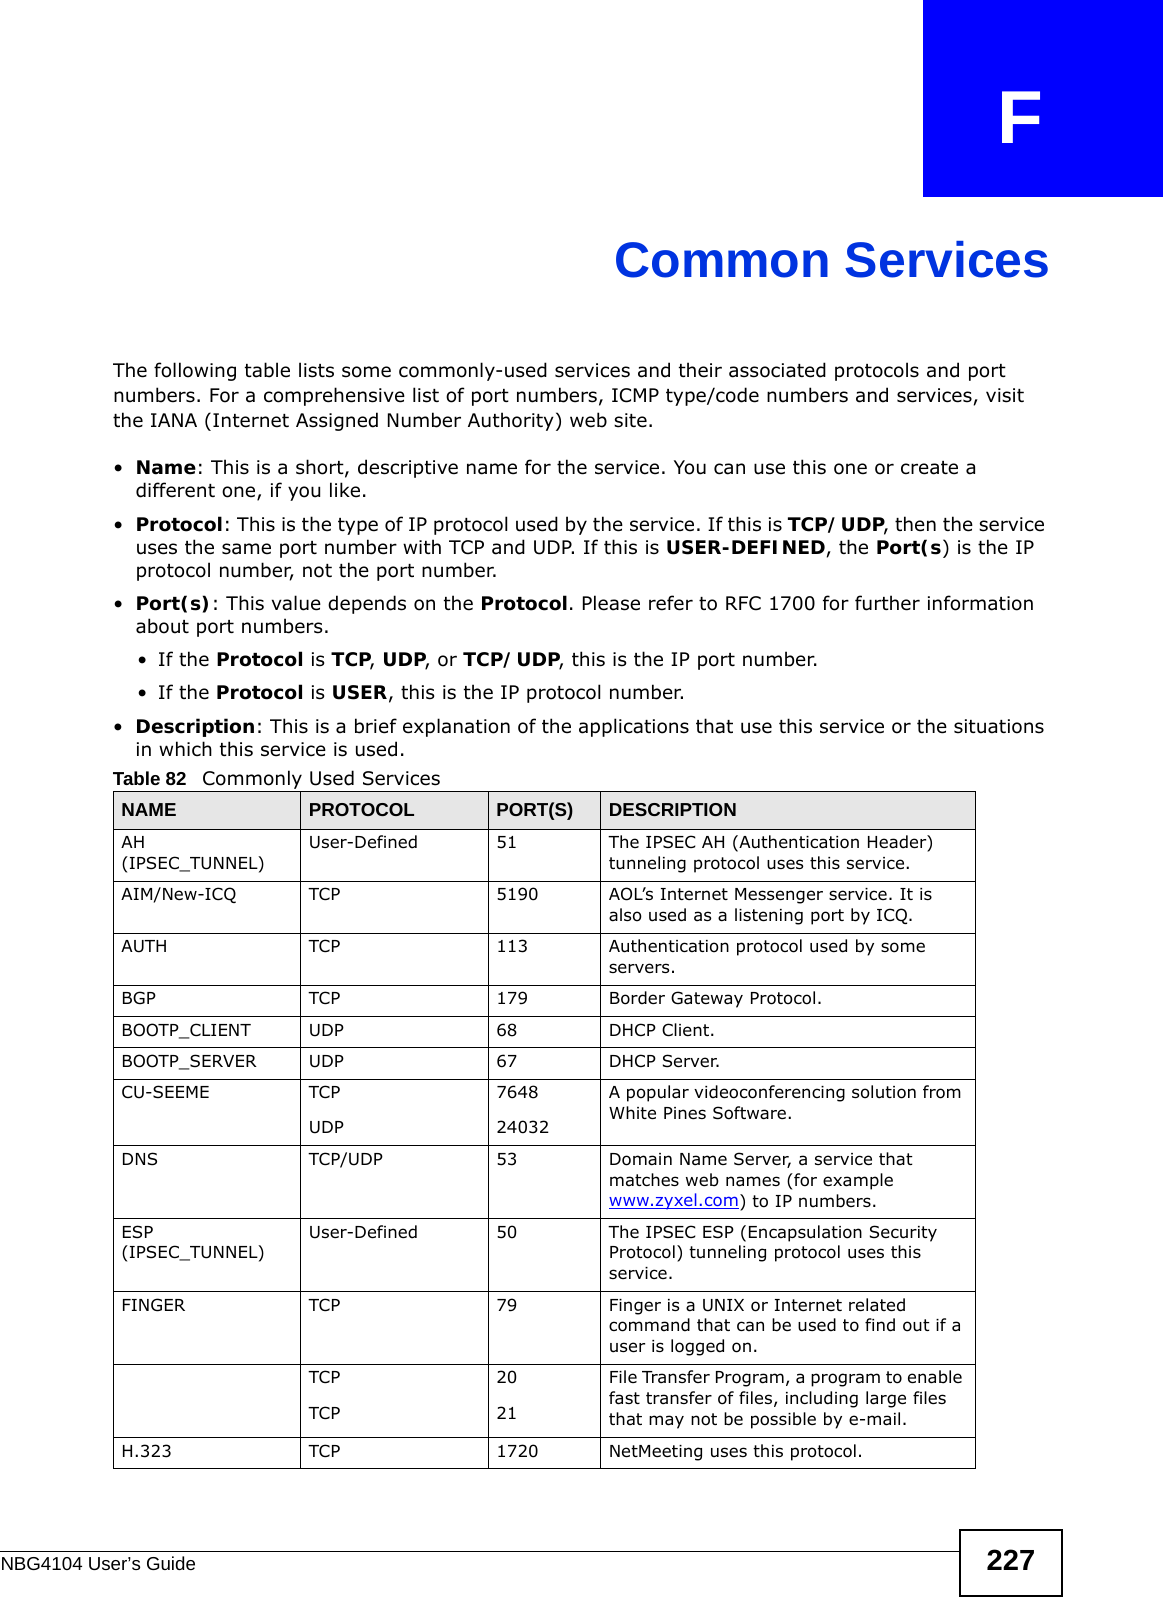 NBG4104 User’s Guide 227APPENDIX   FCommon ServicesThe following table lists some commonly-used services and their associated protocols and port numbers. For a comprehensive list of port numbers, ICMP type/code numbers and services, visit the IANA (Internet Assigned Number Authority) web site. •Name: This is a short, descriptive name for the service. You can use this one or create a different one, if you like.•Protocol: This is the type of IP protocol used by the service. If this is TCP/UDP, then the service uses the same port number with TCP and UDP. If this is USER-DEFINED, the Port(s) is the IP protocol number, not the port number.•Port(s): This value depends on the Protocol. Please refer to RFC 1700 for further information about port numbers.•If the Protocol is TCP, UDP, or TCP/UDP, this is the IP port number.•If the Protocol is USER, this is the IP protocol number.•Description: This is a brief explanation of the applications that use this service or the situations in which this service is used.Table 82   Commonly Used ServicesNAME PROTOCOL PORT(S) DESCRIPTIONAH (IPSEC_TUNNEL)User-Defined 51 The IPSEC AH (Authentication Header) tunneling protocol uses this service.AIM/New-ICQ TCP 5190 AOL’s Internet Messenger service. It is also used as a listening port by ICQ.AUTH TCP 113 Authentication protocol used by some servers.BGP TCP 179 Border Gateway Protocol.BOOTP_CLIENT UDP 68 DHCP Client.BOOTP_SERVER UDP 67 DHCP Server.CU-SEEME TCPUDP764824032A popular videoconferencing solution from White Pines Software.DNS TCP/UDP 53 Domain Name Server, a service that matches web names (for example www.zyxel.com) to IP numbers.ESP (IPSEC_TUNNEL)User-Defined 50 The IPSEC ESP (Encapsulation Security Protocol) tunneling protocol uses this service.FINGER TCP 79 Finger is a UNIX or Internet related command that can be used to find out if a user is logged on.TCPTCP2021File Transfer Program, a program to enable fast transfer of files, including large files that may not be possible by e-mail.H.323 TCP 1720 NetMeeting uses this protocol.